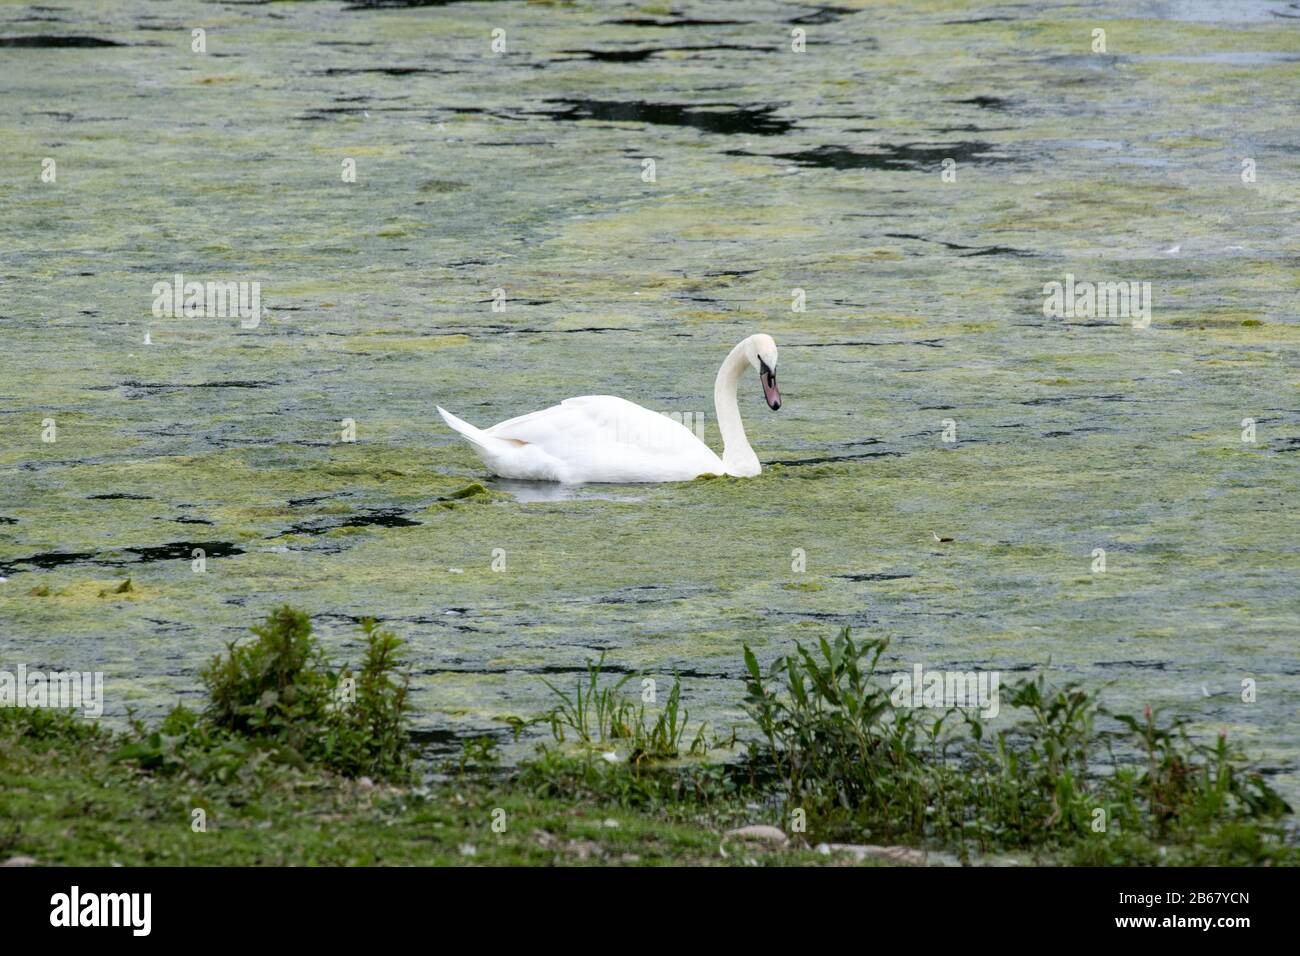 A mute swan negotiates an algal bloom on a wildlife pond, now choaked with slime, in the UK countryside. Stock Photo